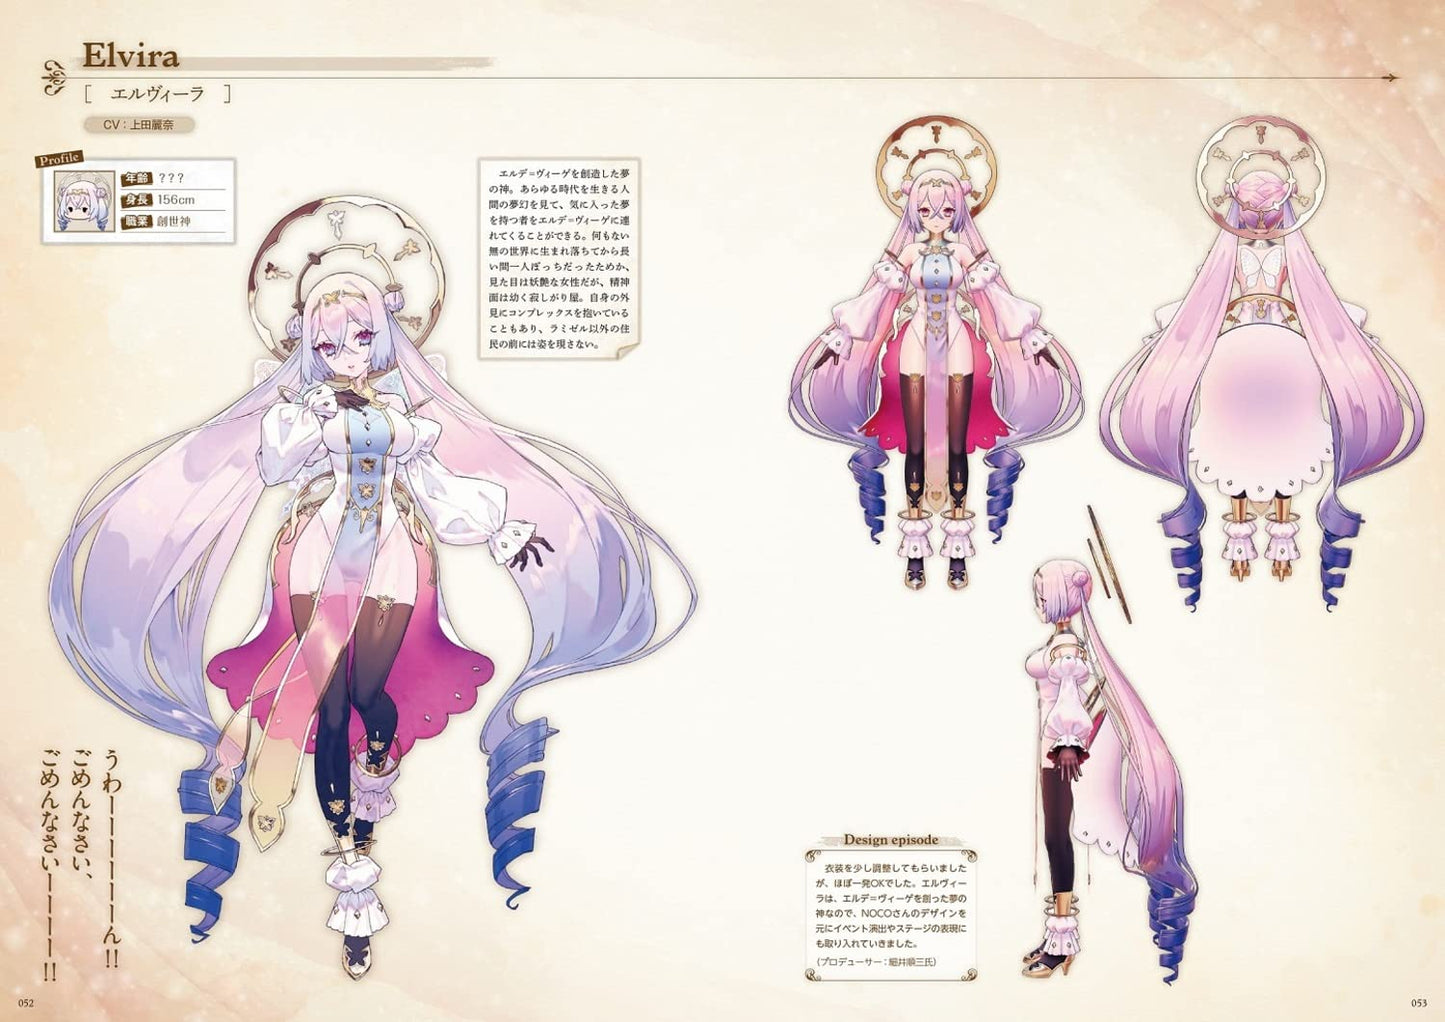 Atelier Sophie 2 The Alchemist of the Mysterious Dream Official Visual Collection